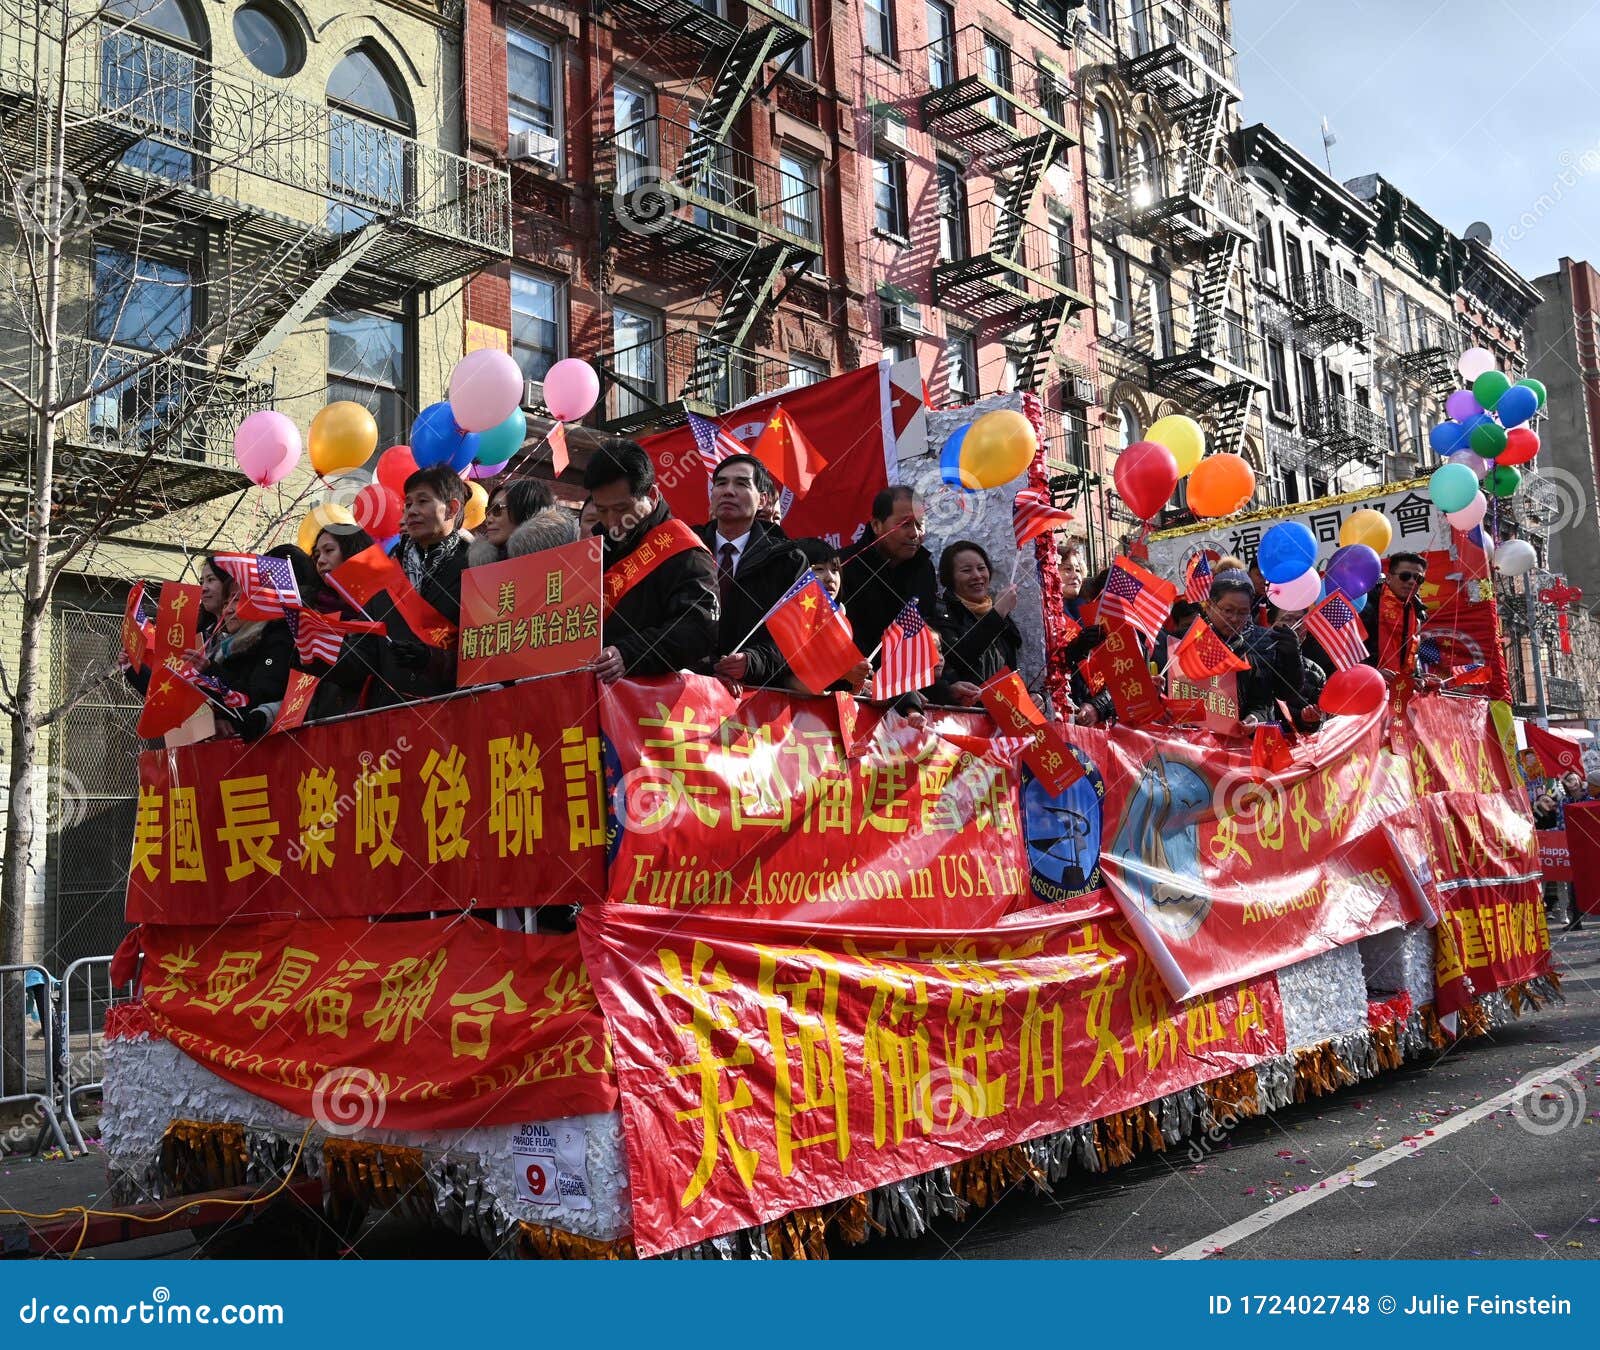 Lunar New Year New York City Editorial Stock Photo Image of city